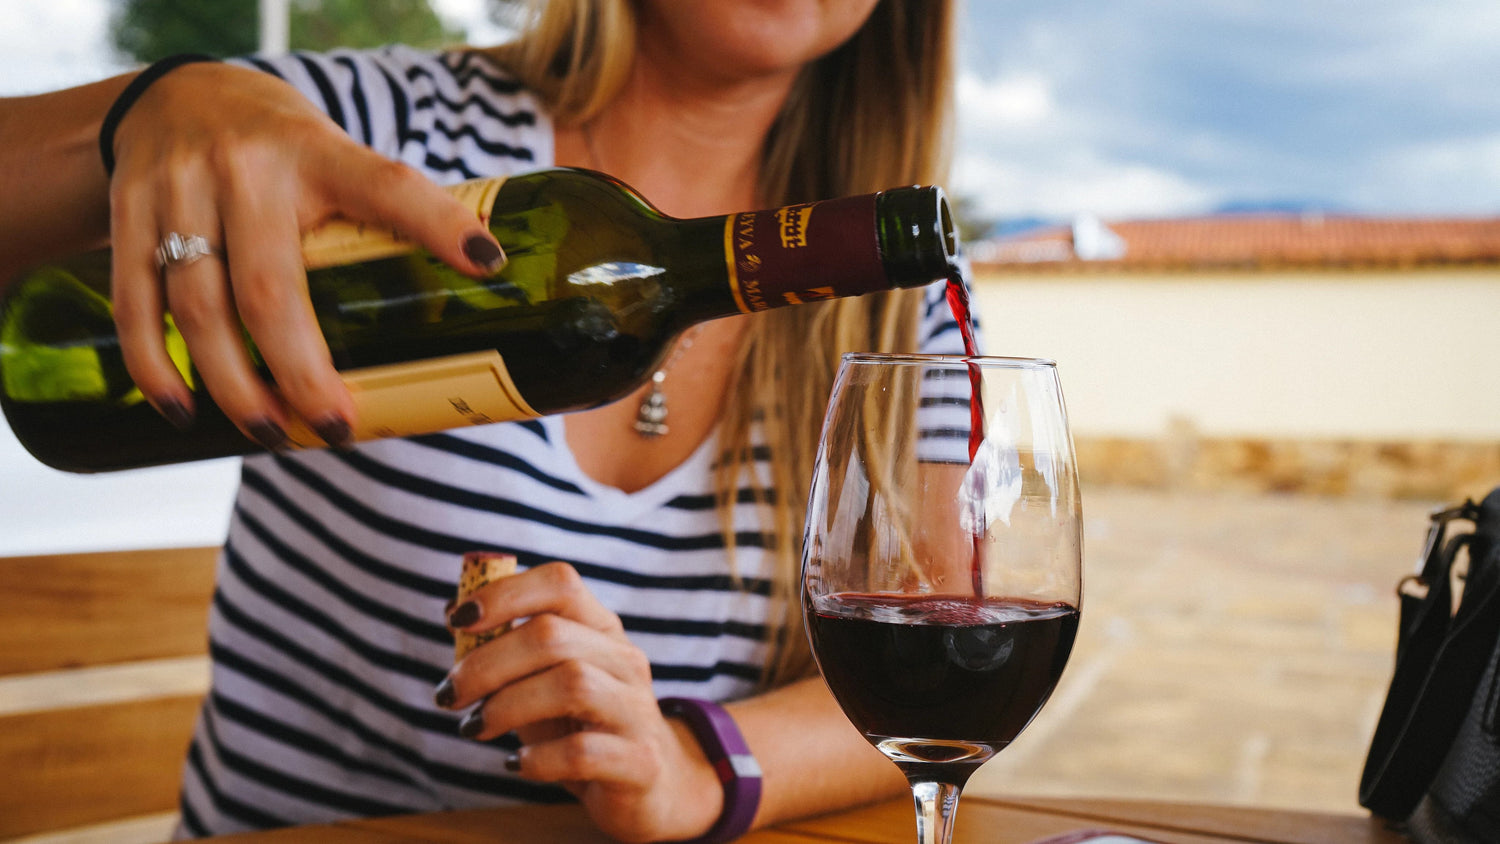 banner pic: woman pouring wine